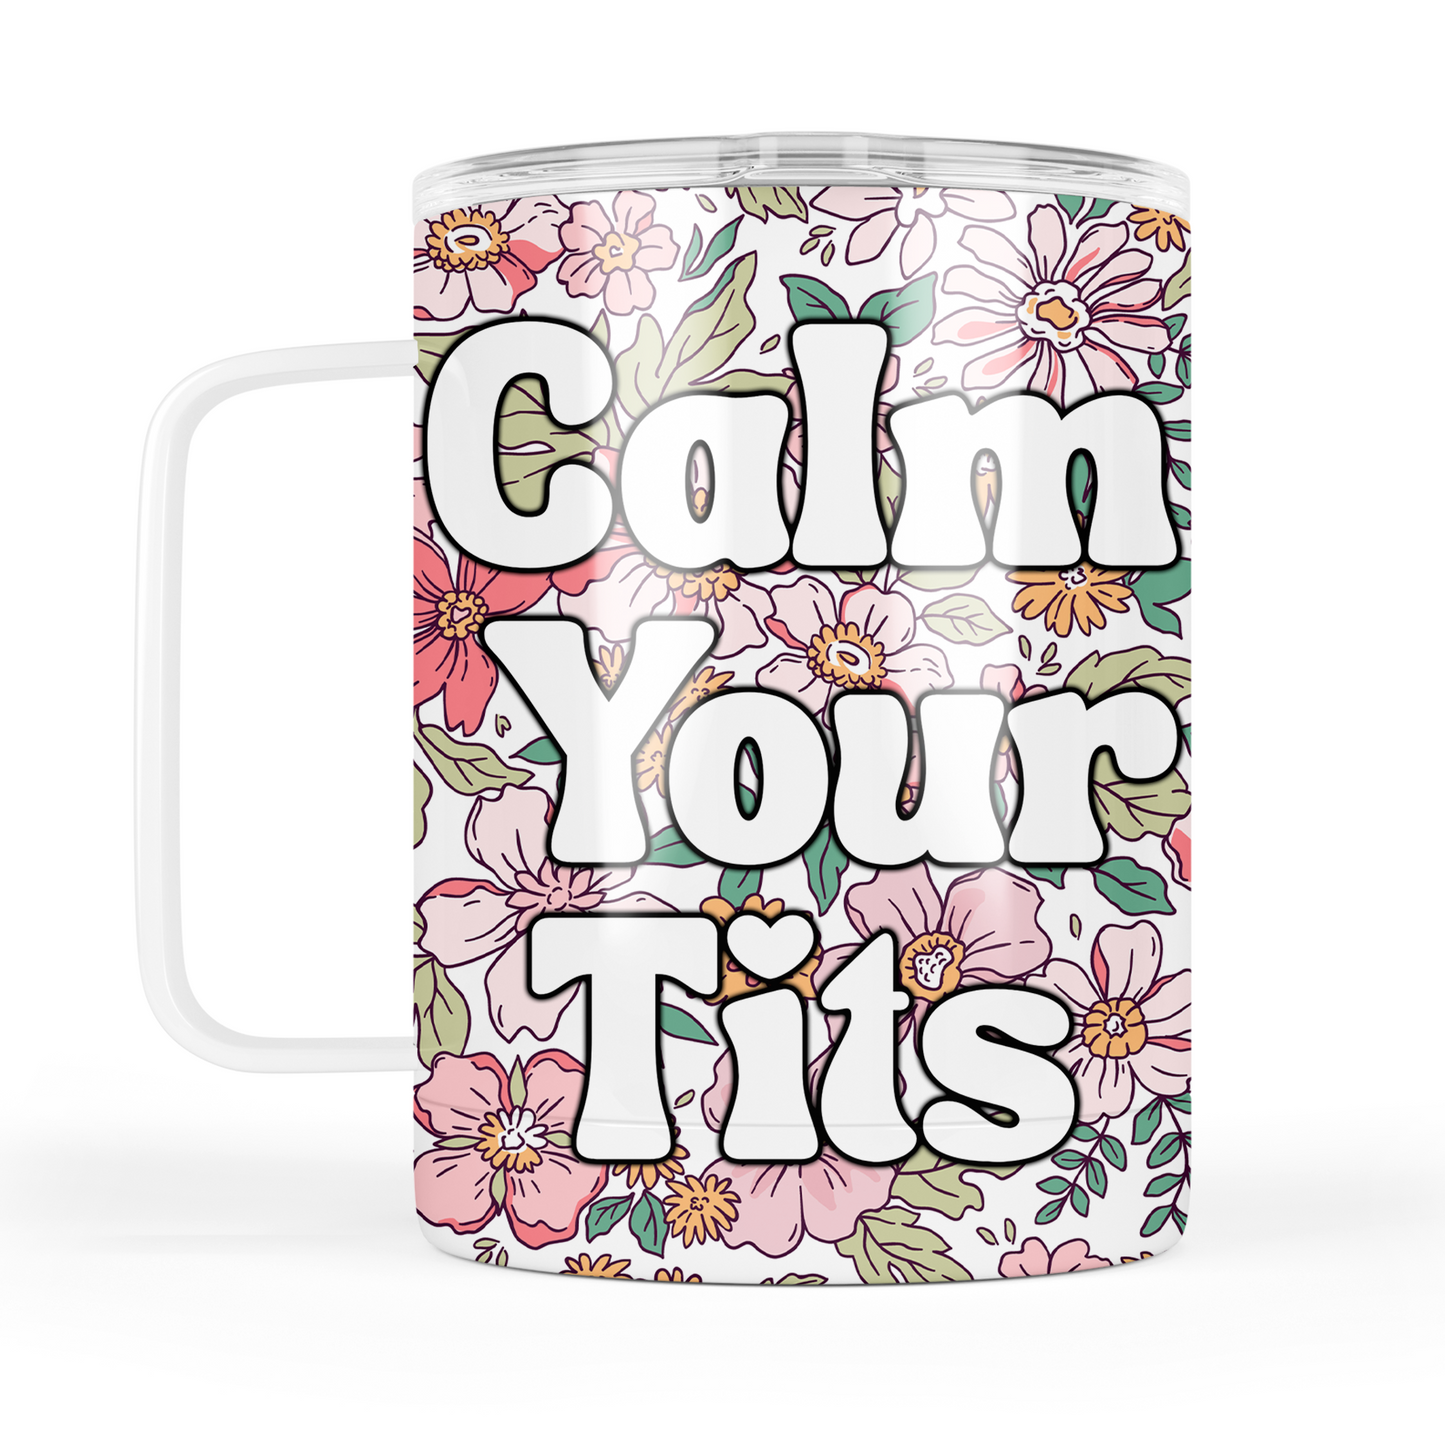 Calm Your Tits Mug With Lid